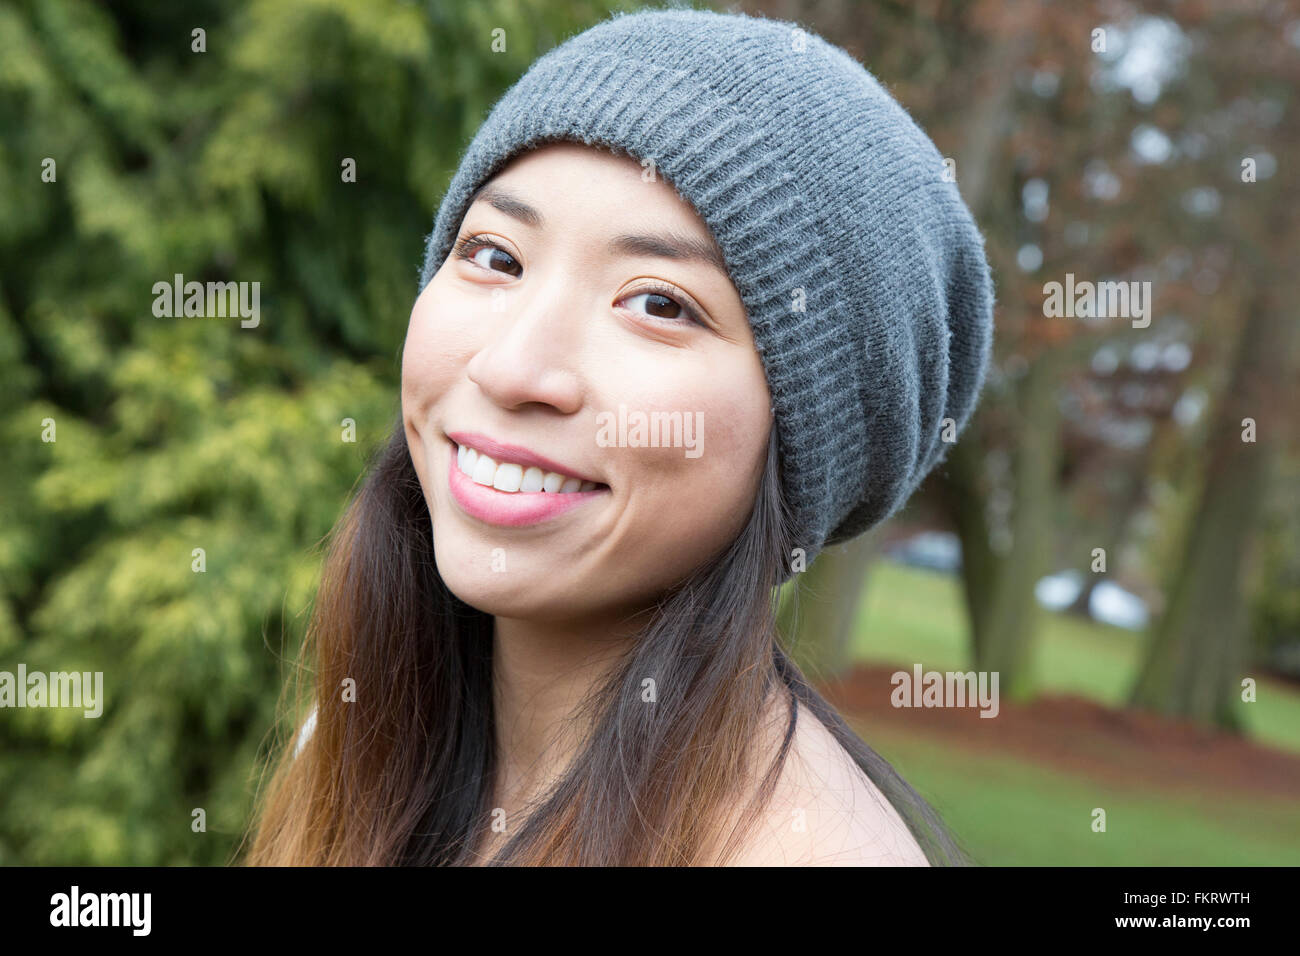 Japanese woman wearing beanie outdoors Banque D'Images